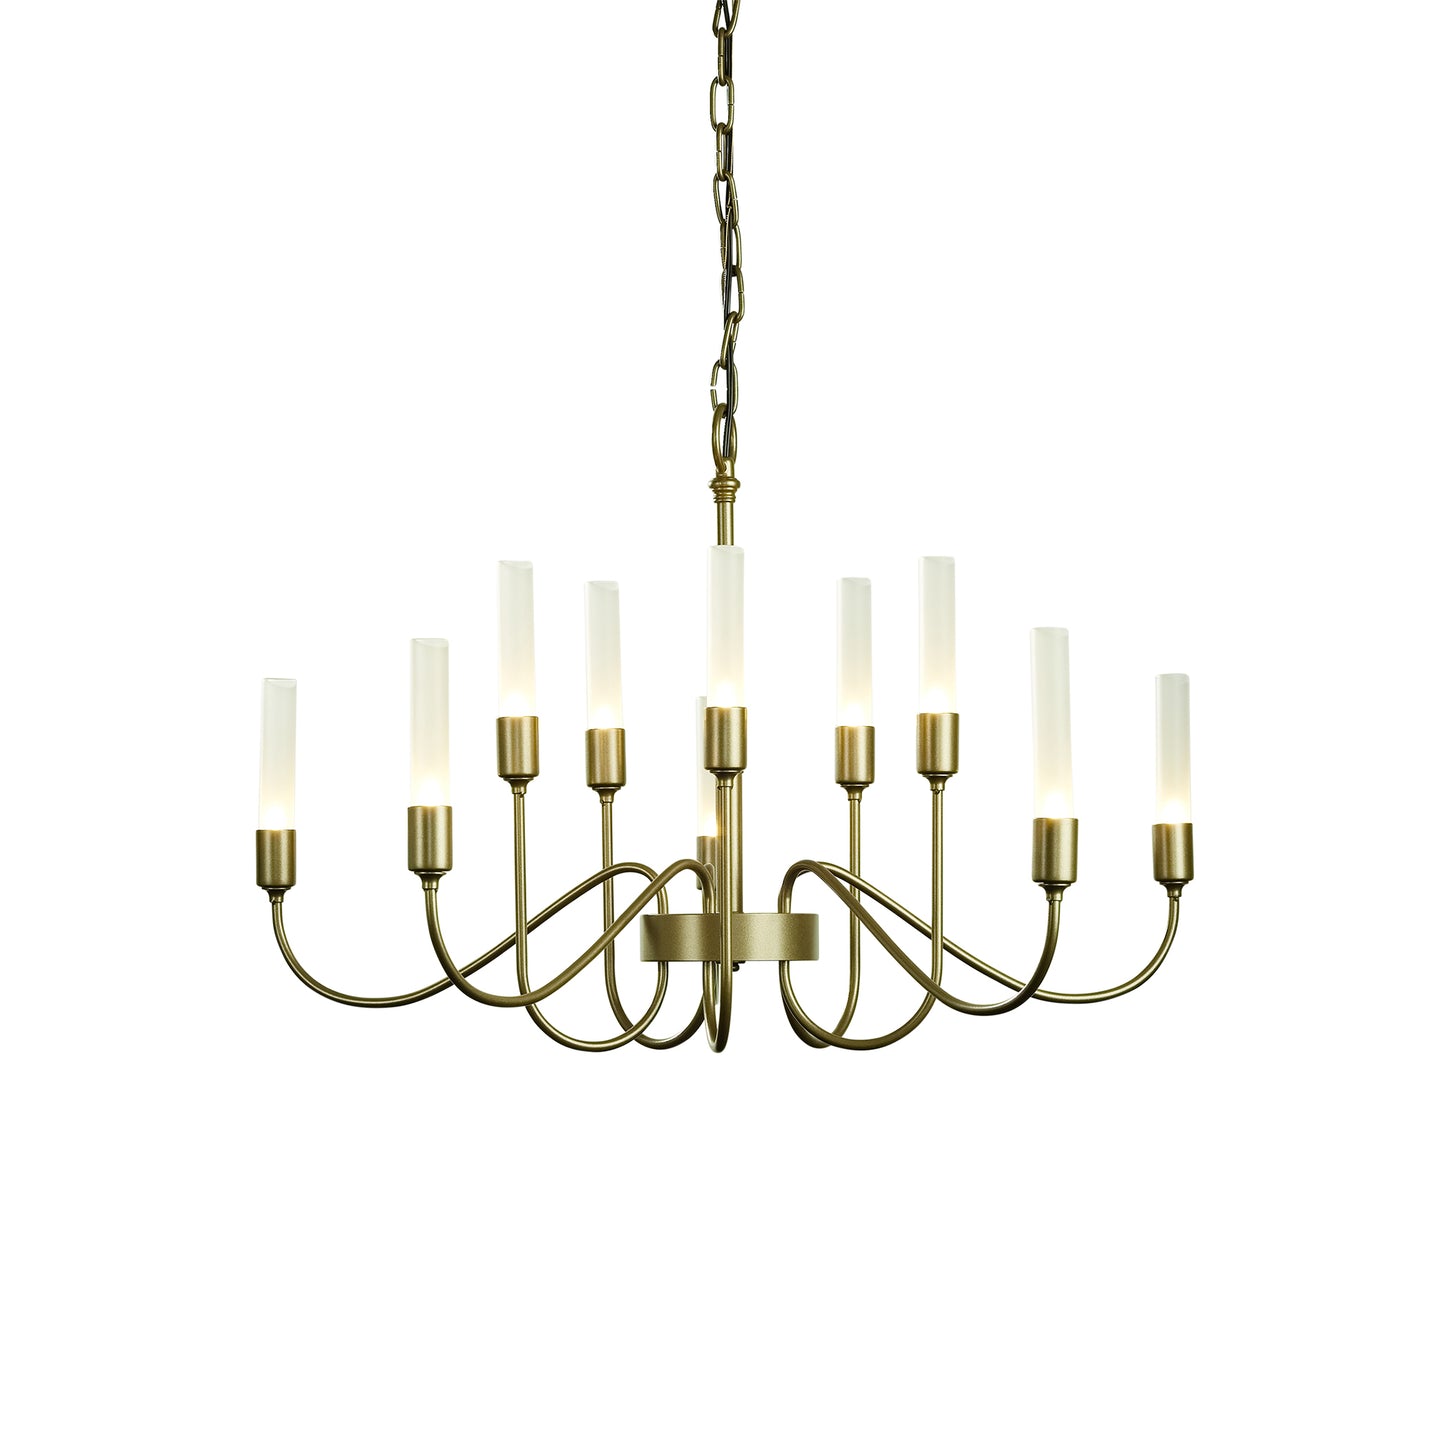 The Hubbardton Forge Lisse 10-Arm Chandelier, handcrafted in Vermont, showcases a stunning brass design with six lights and frosted glass.